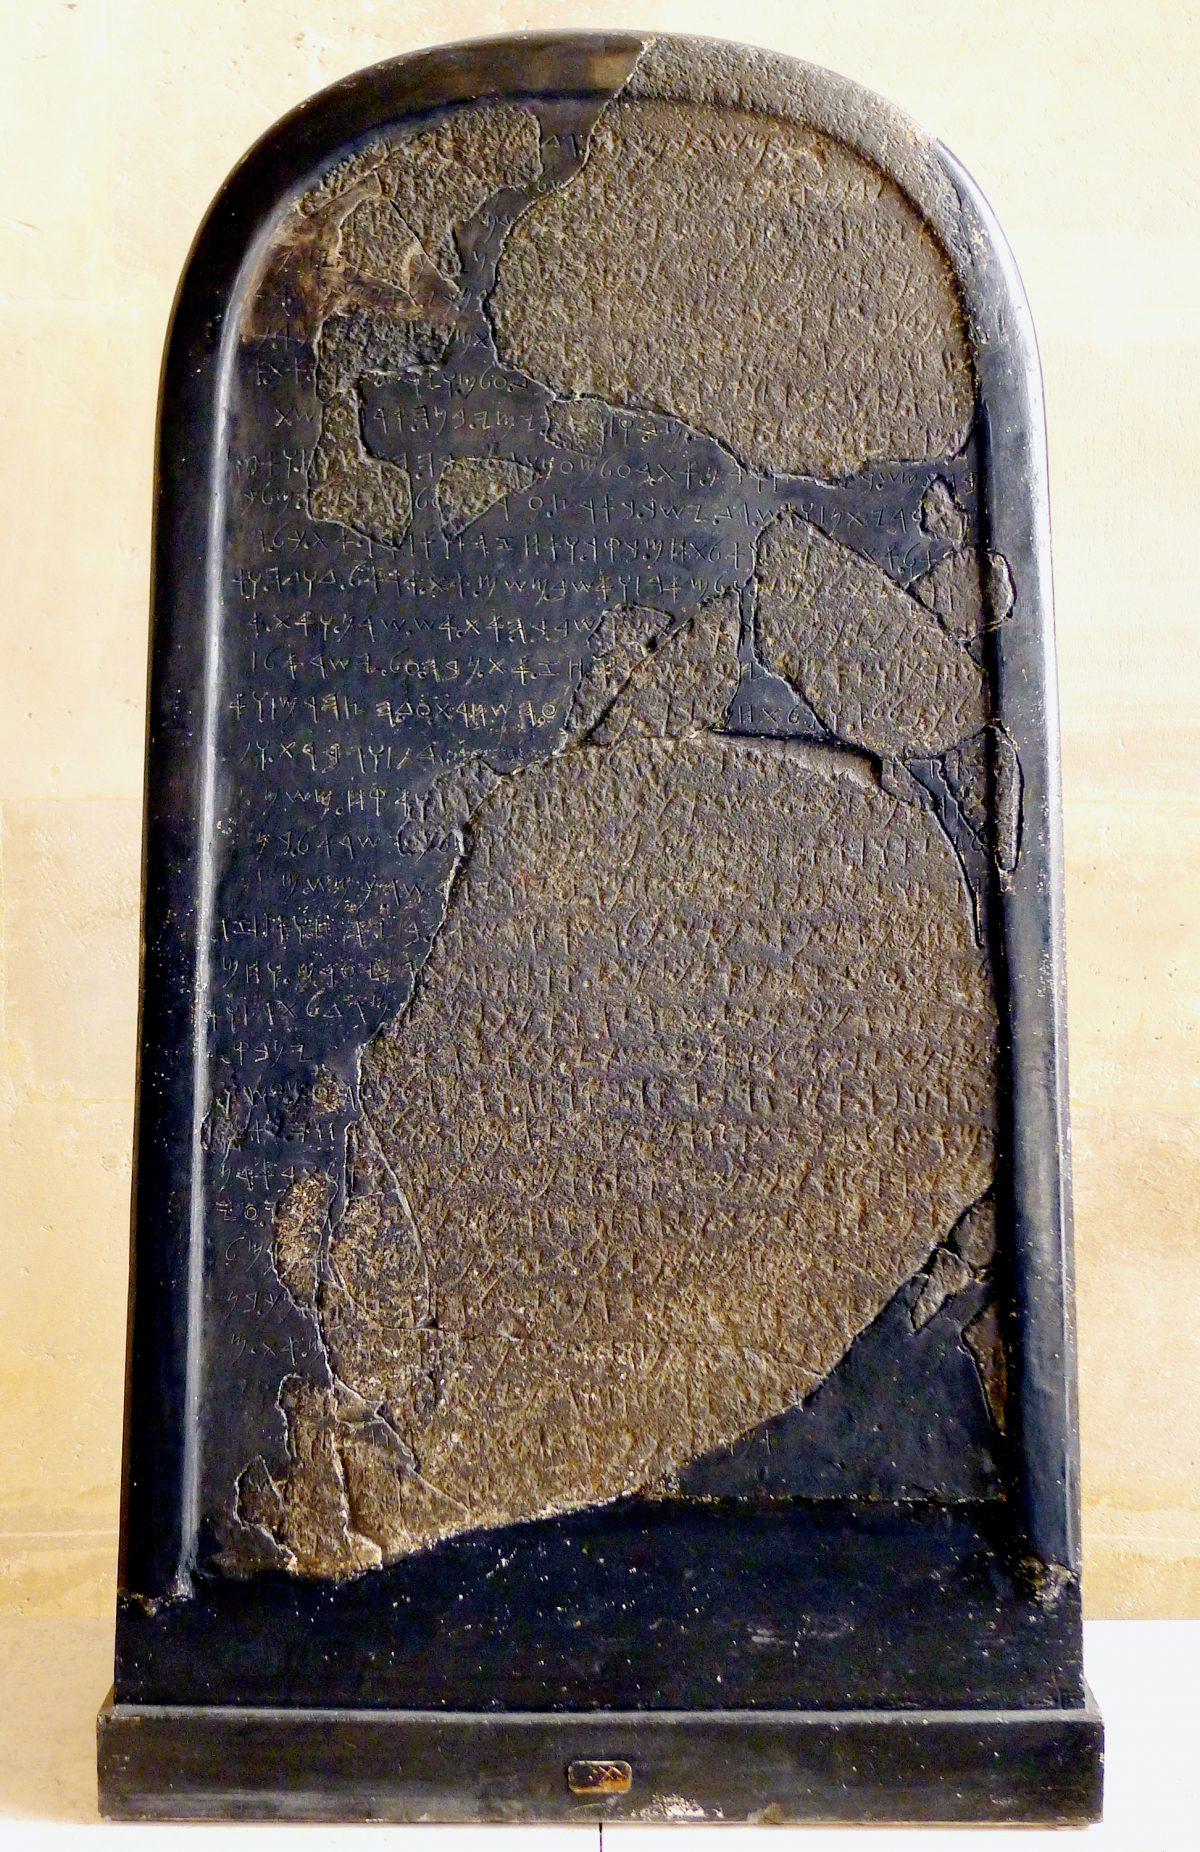 Image of Mesha Stele. (Mbzt/Wikimedia Commons [CC BY-SA 3.0 (ept.ms/2Bw5evC)])